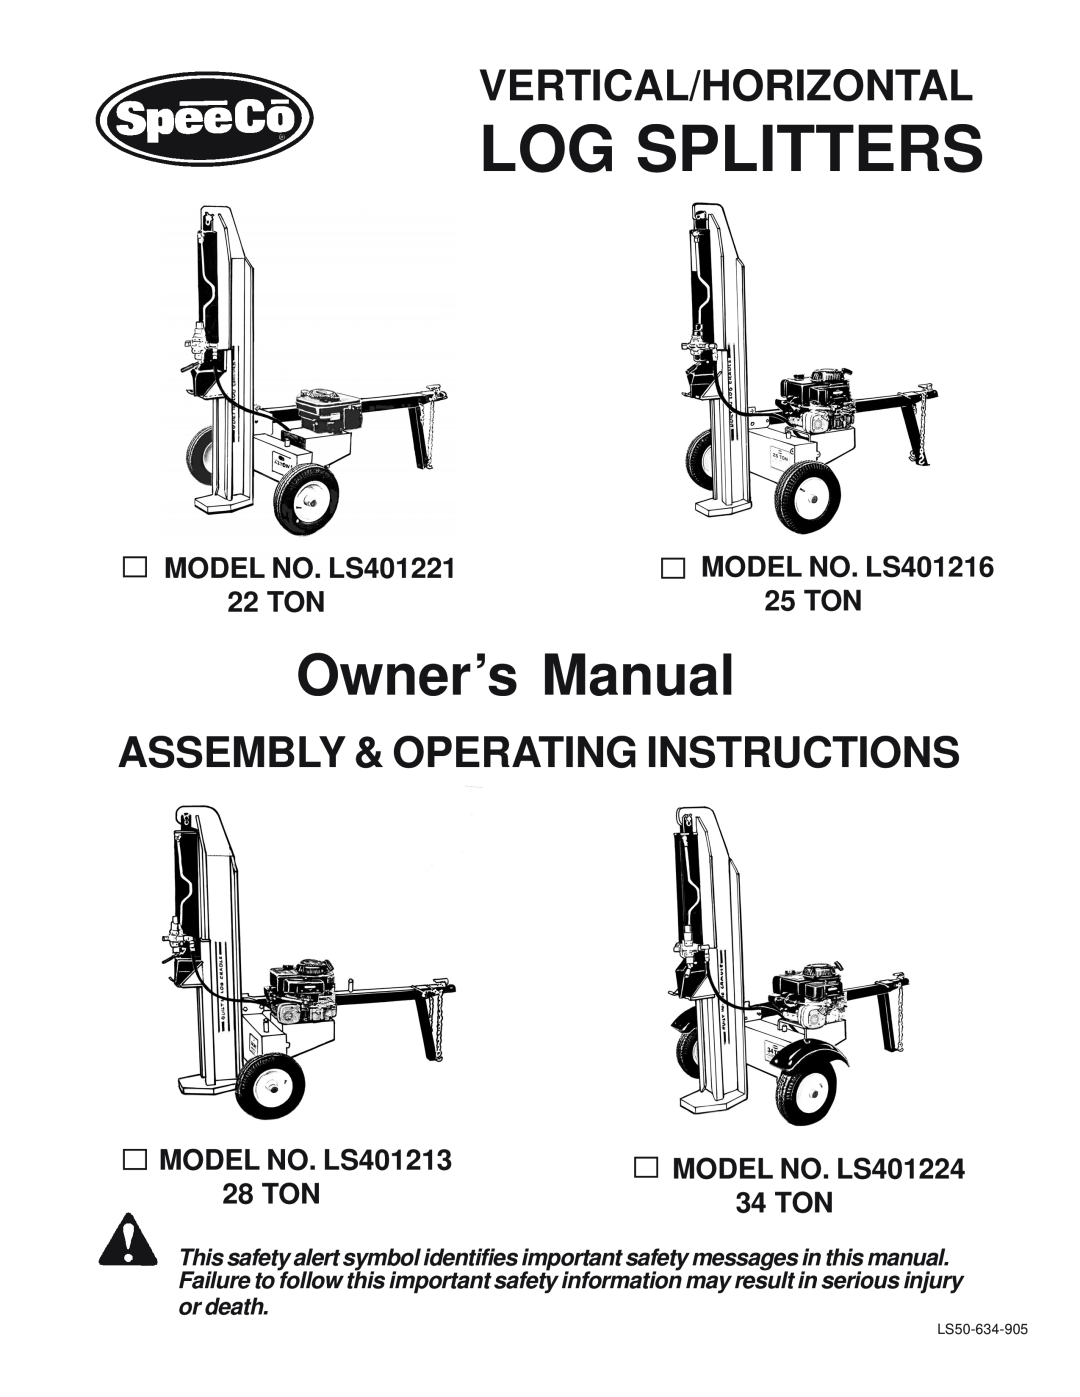 Briggs & Stratton LS401224 owner manual Vertical/Horizontal, Assembly & Operating Instructions, Log Splitters, 28 TON 